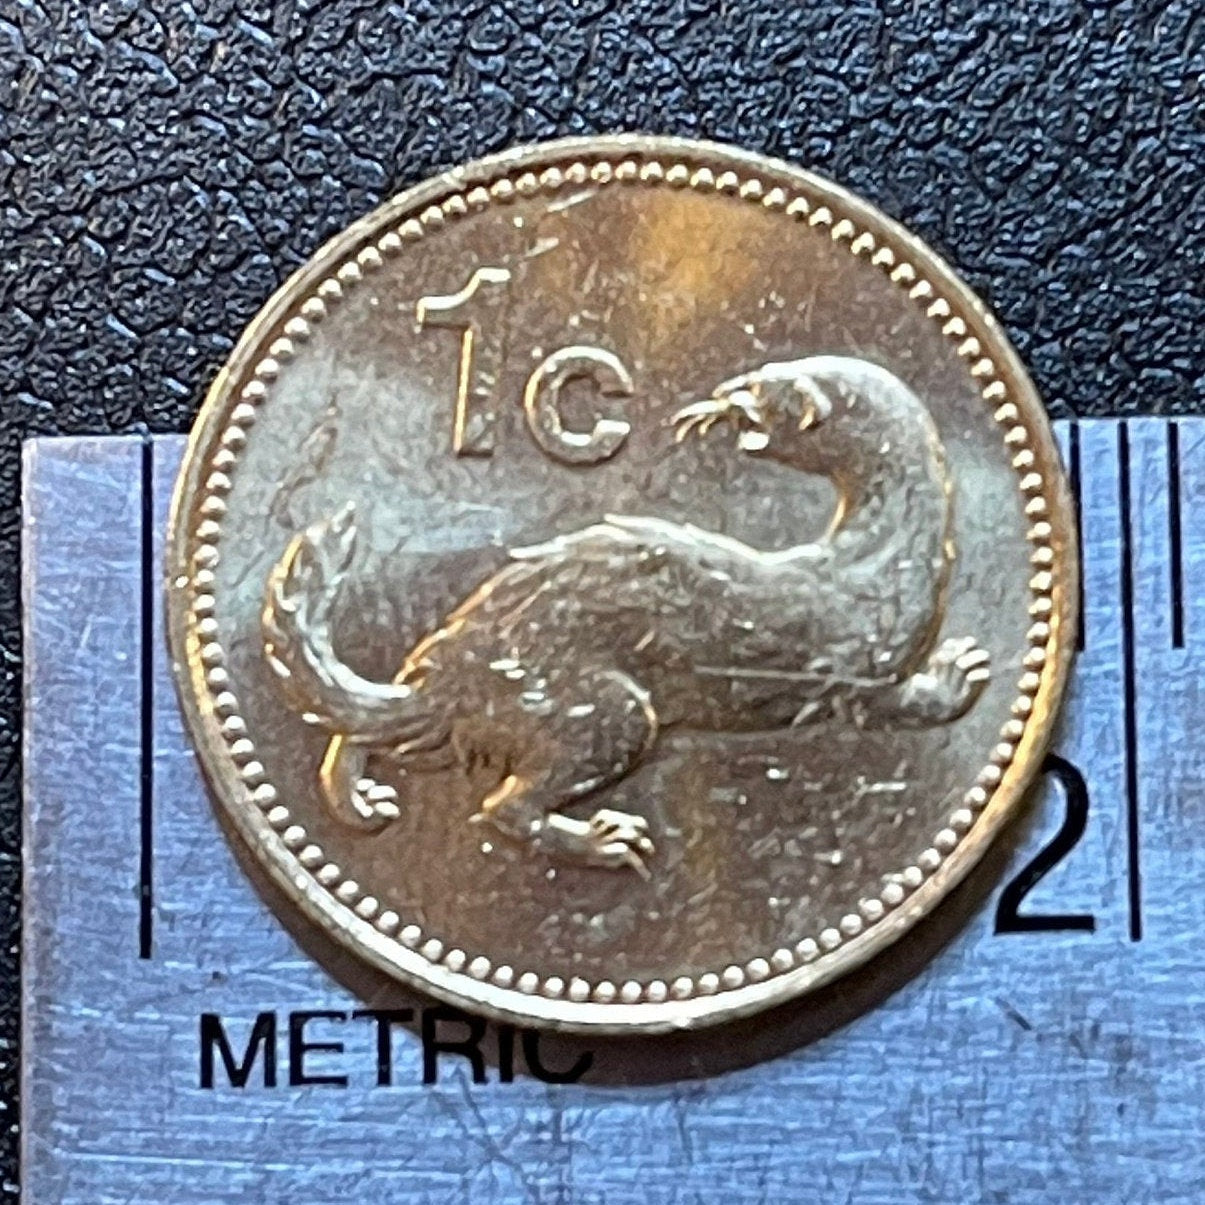 Weasel 1 Cent Malta Authentic Coin Money for Jewelry and Craft Making (Ermine)